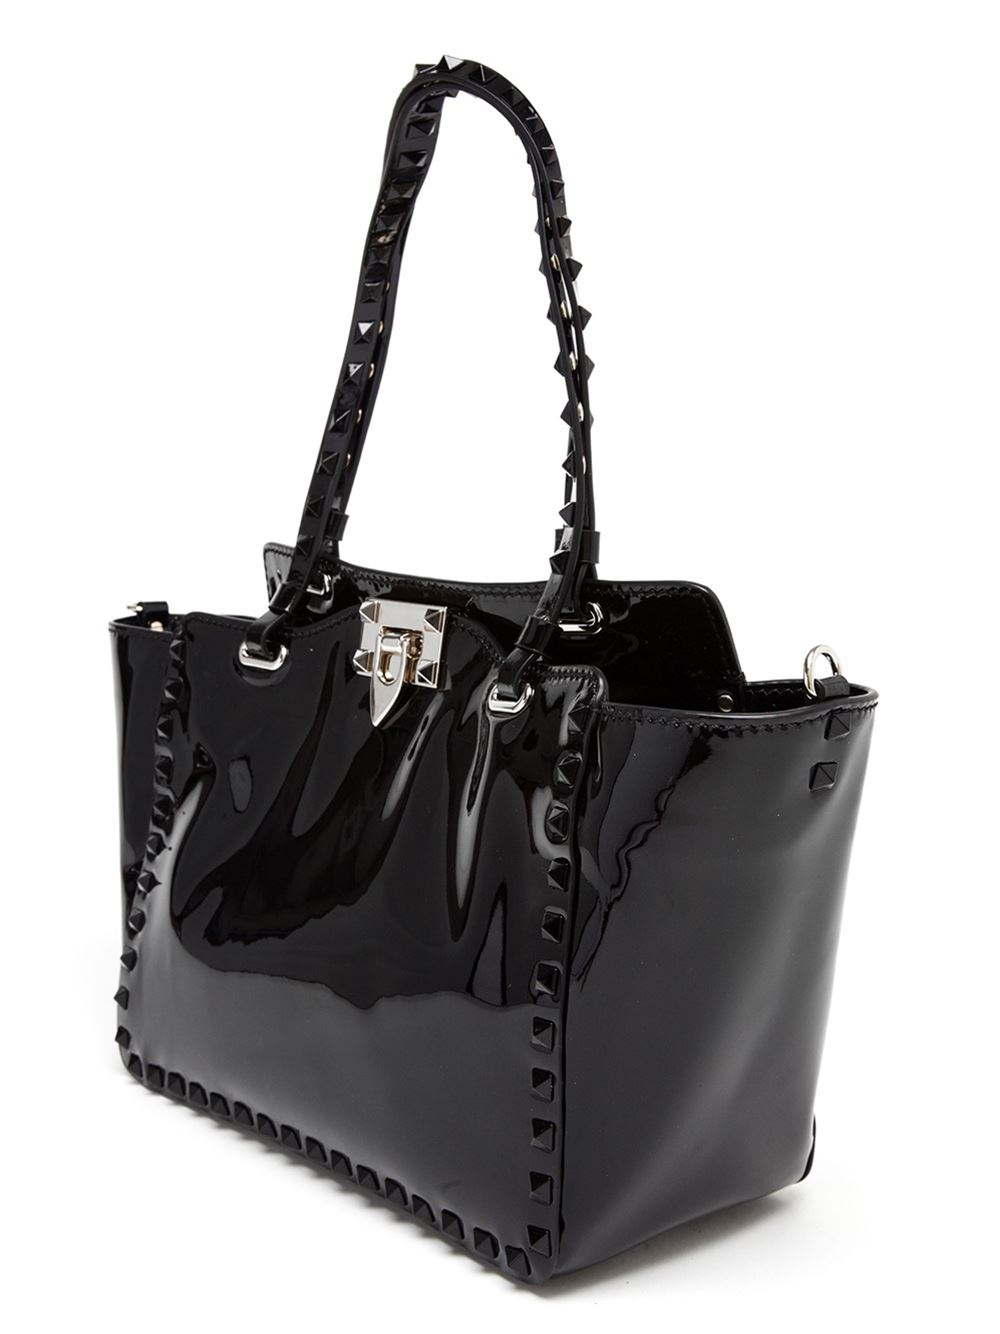 Lyst - Valentino Rockstud Patent Leather Tote Bag in Black